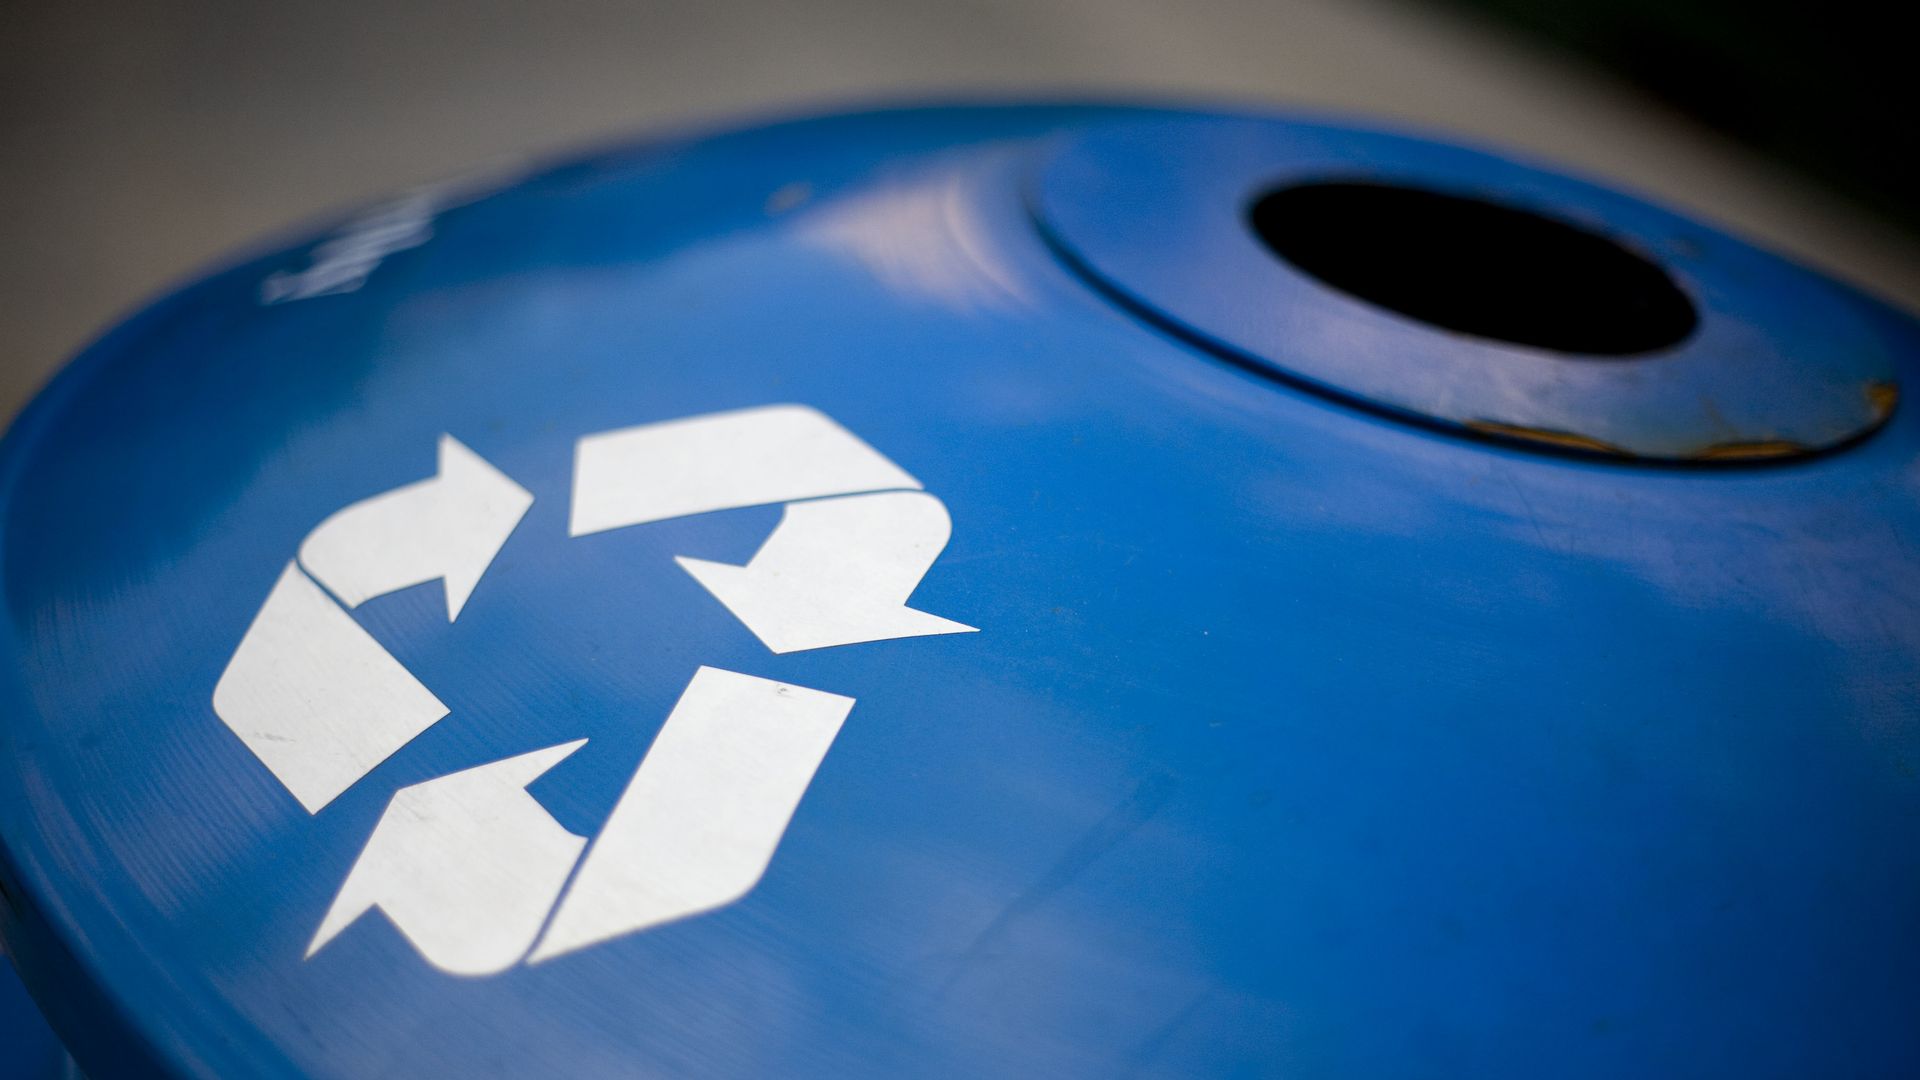 Image of recycling logo.